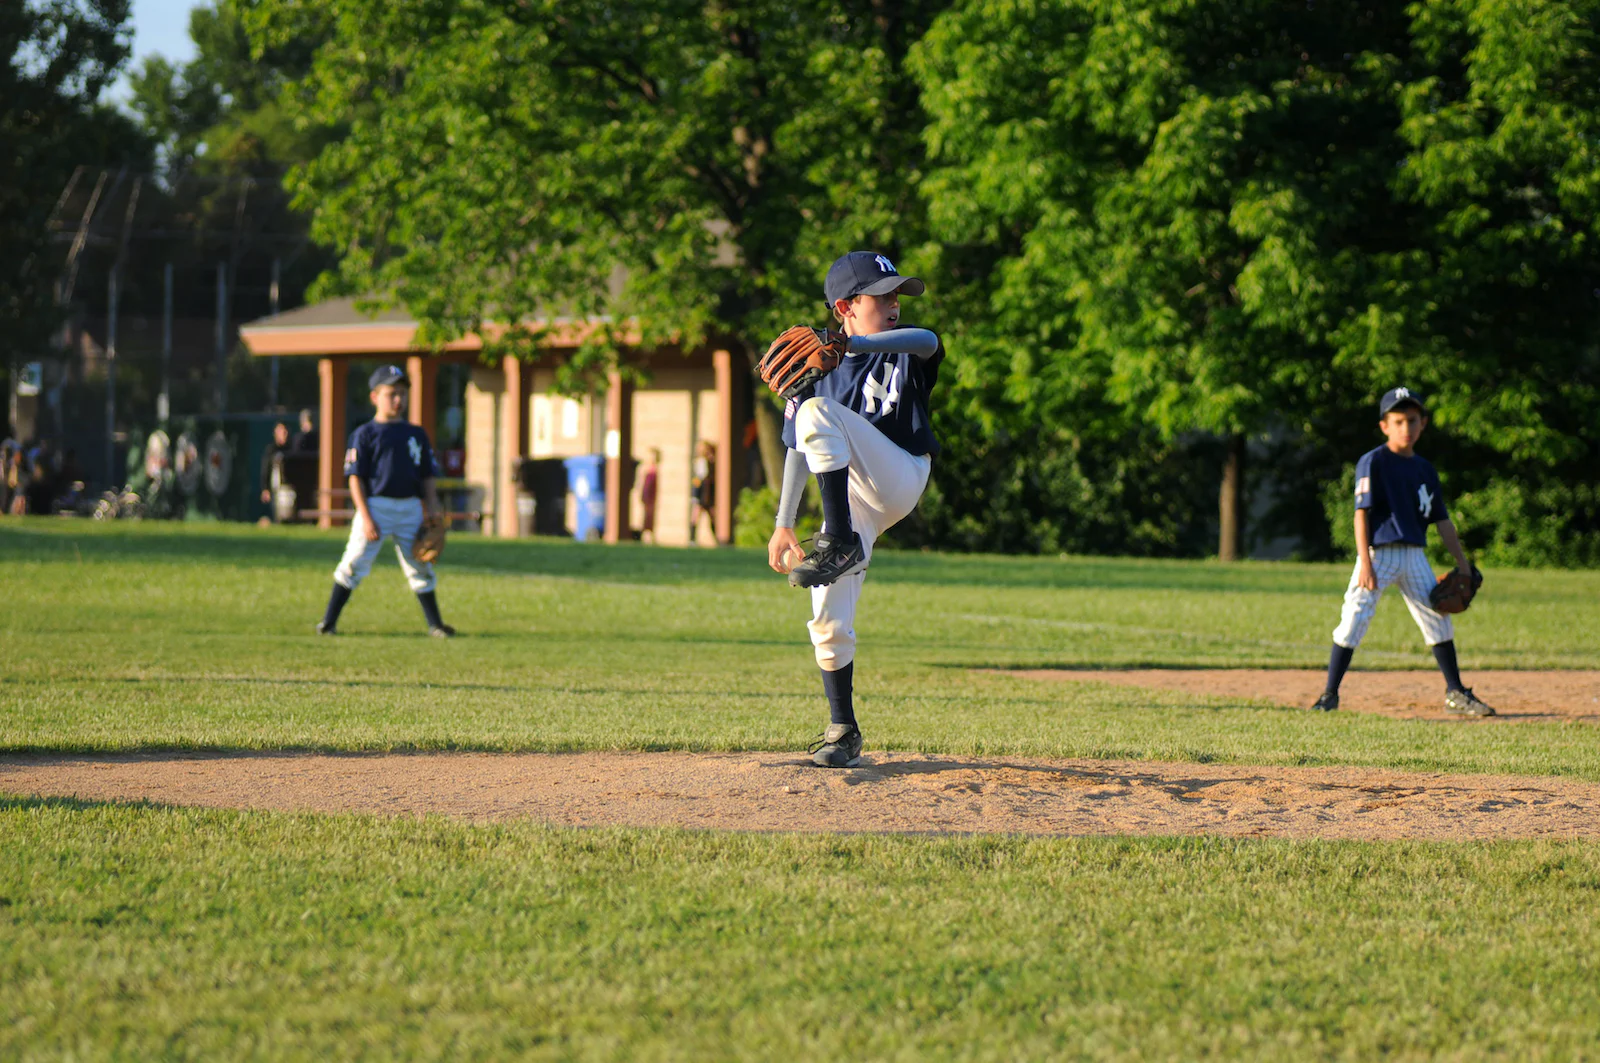 Playing sports on a team or in an association can expose participants to risk.